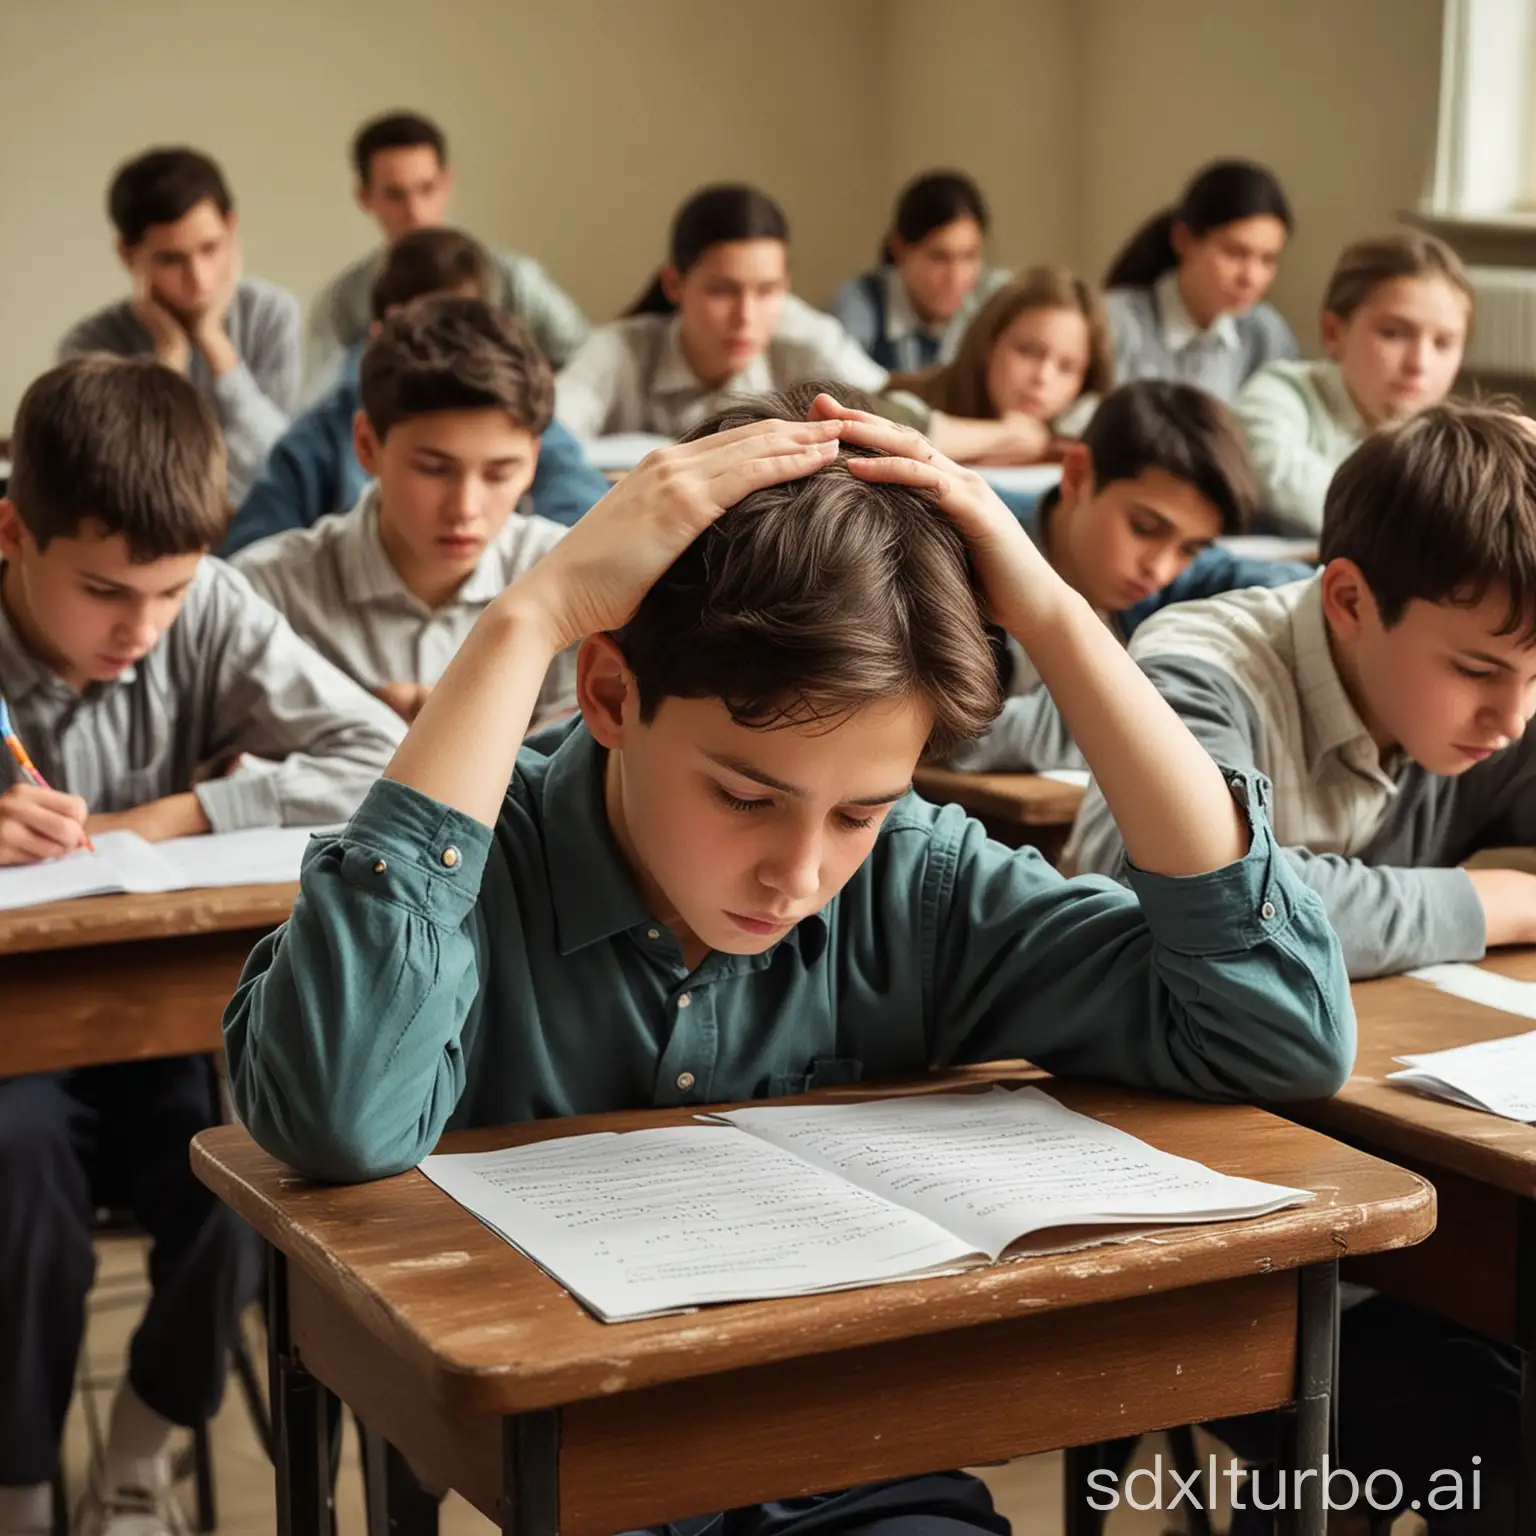 a class of thirty 12-year-old students taking a very difficult math exam, focusing on a child who puts his hands on his head full of despair